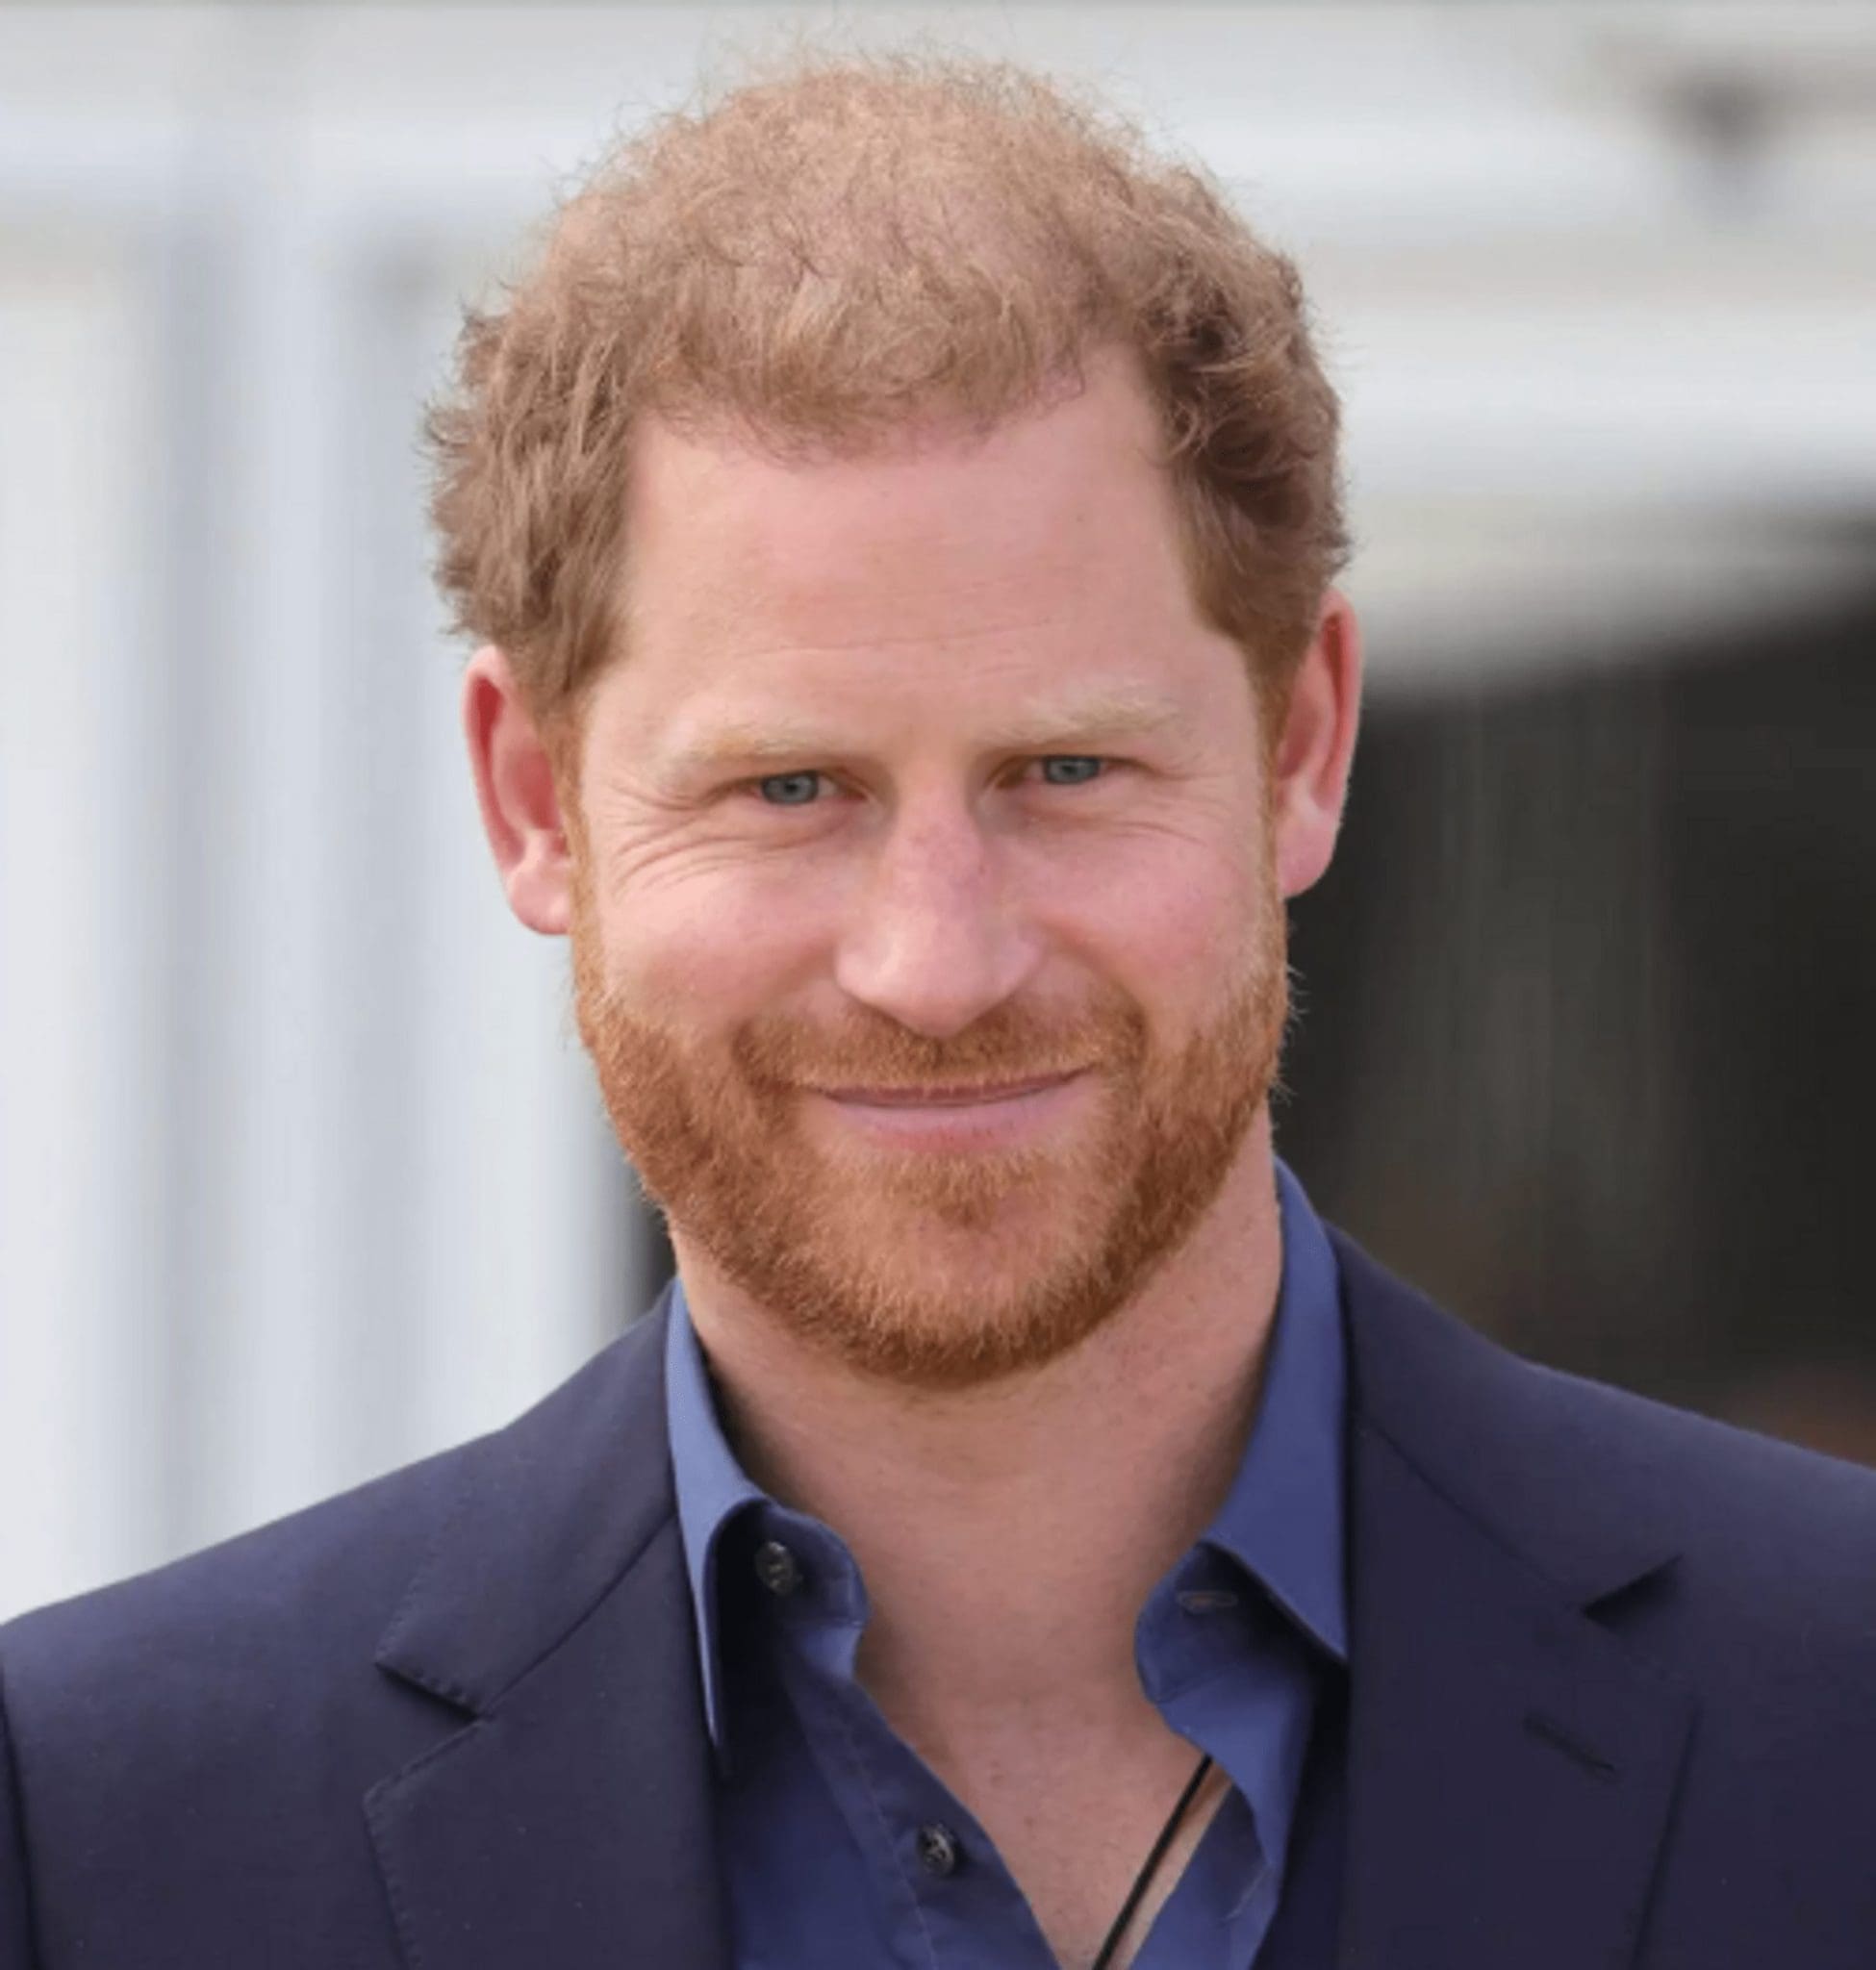 Prince Harry Wins Libel Case Against Mail On Sunday